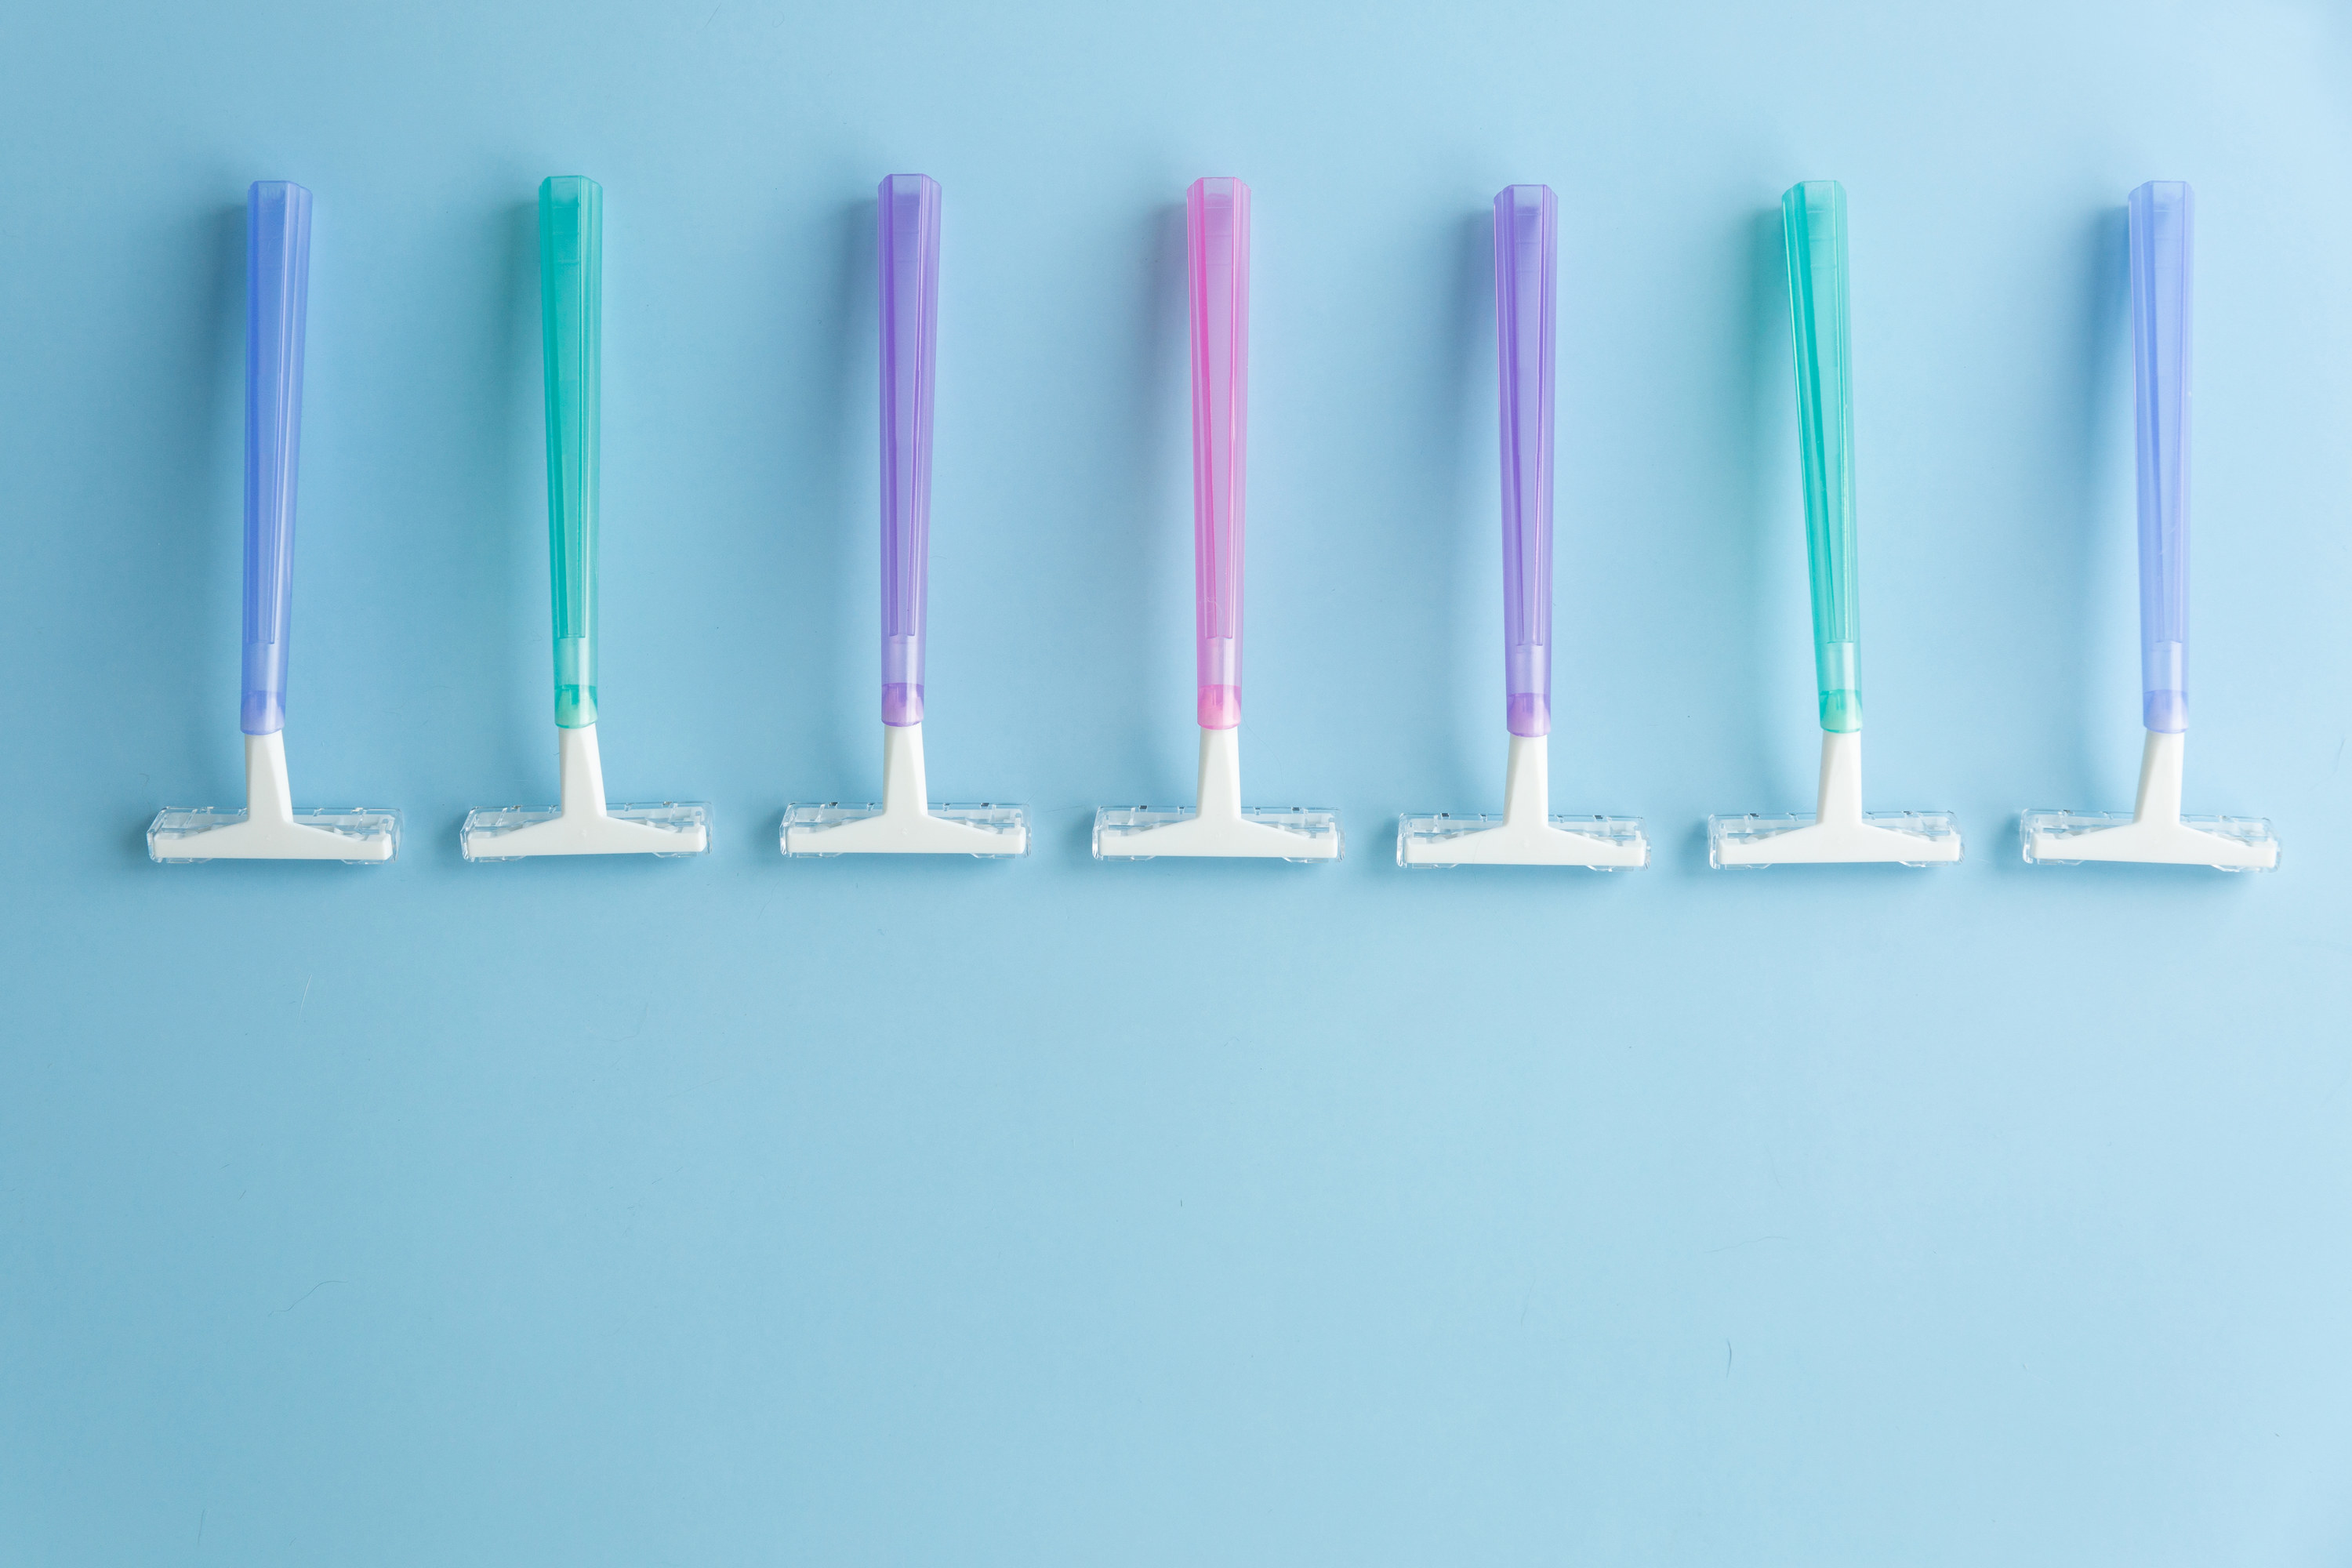 Set of multi-colored disposable razors on a blue background